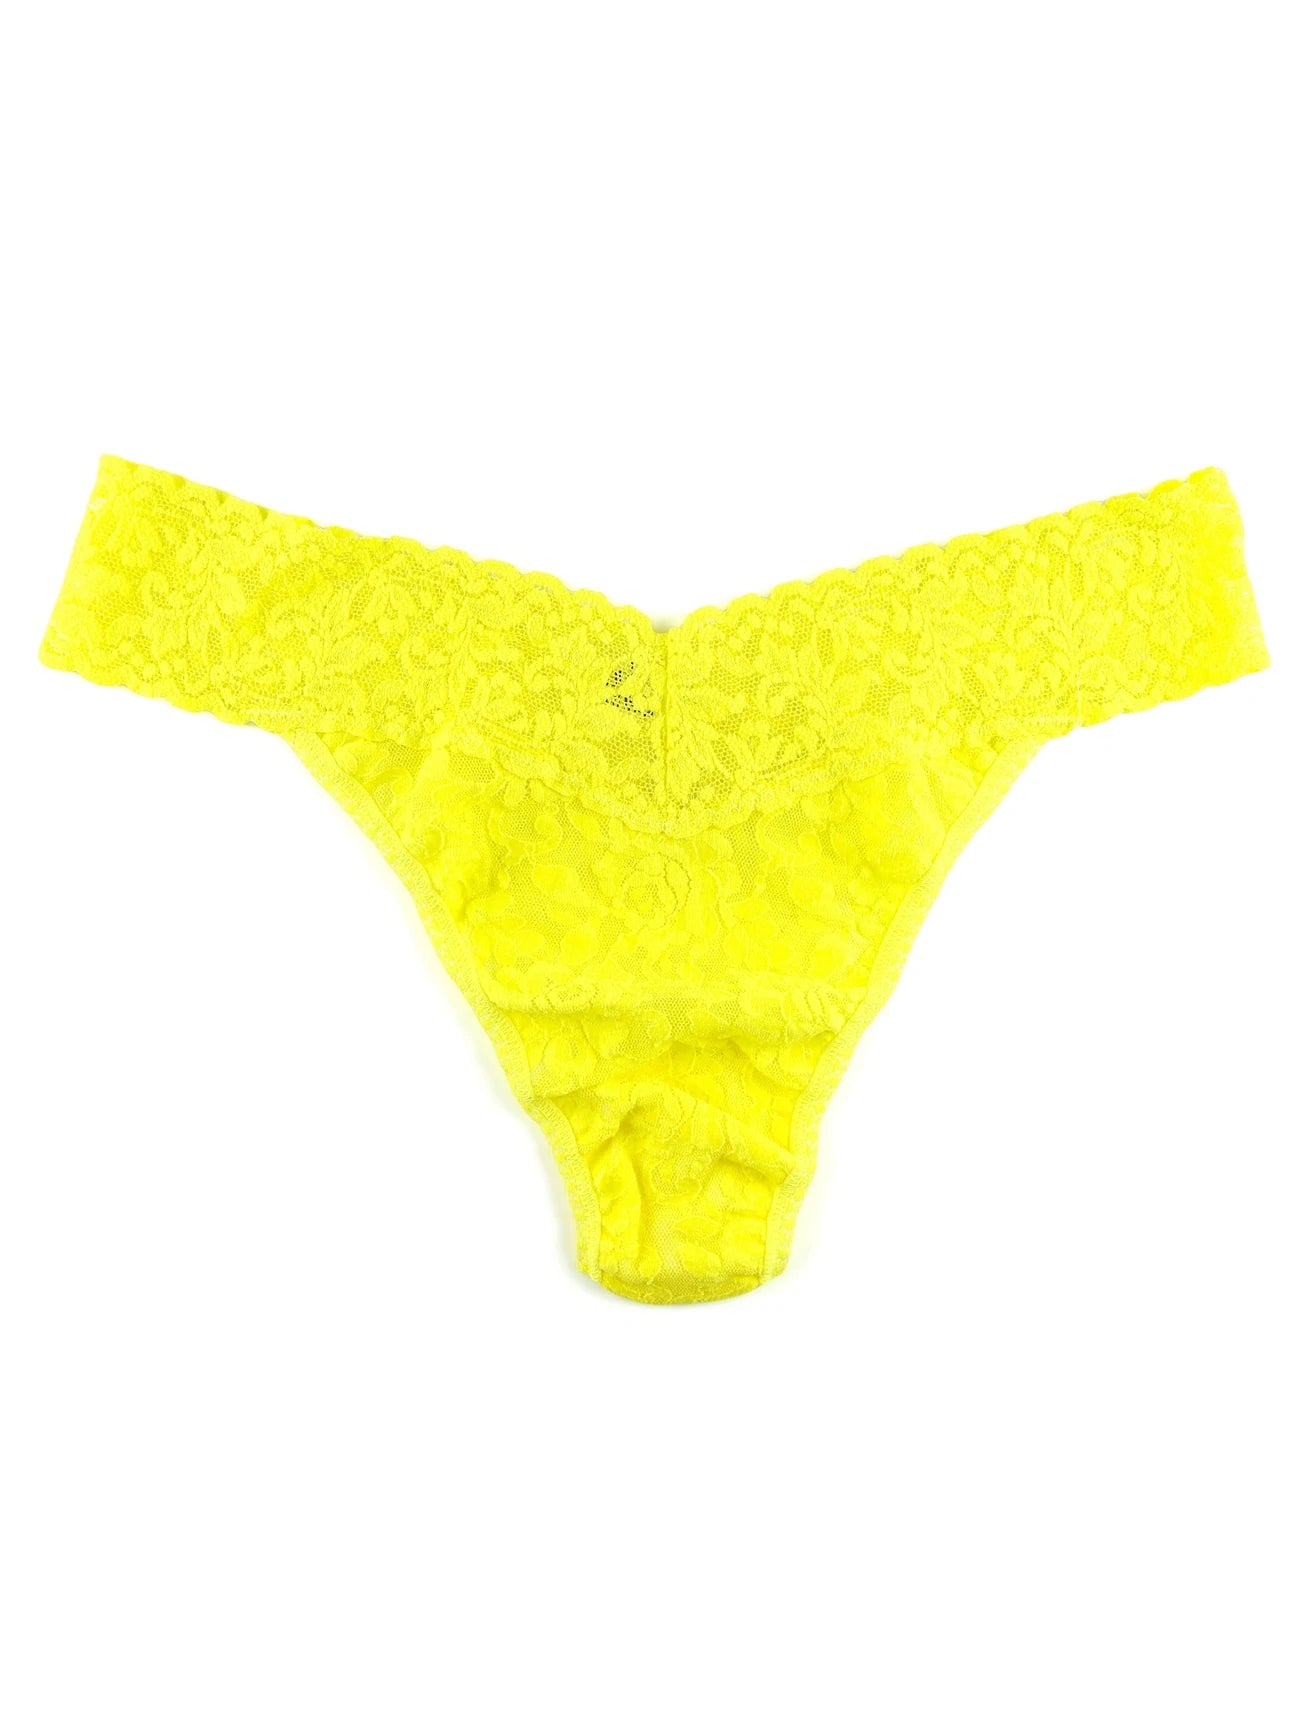 Buy sunny-day Hanky Panky Signature Lace Original Rise Thong-Packaged 4811p